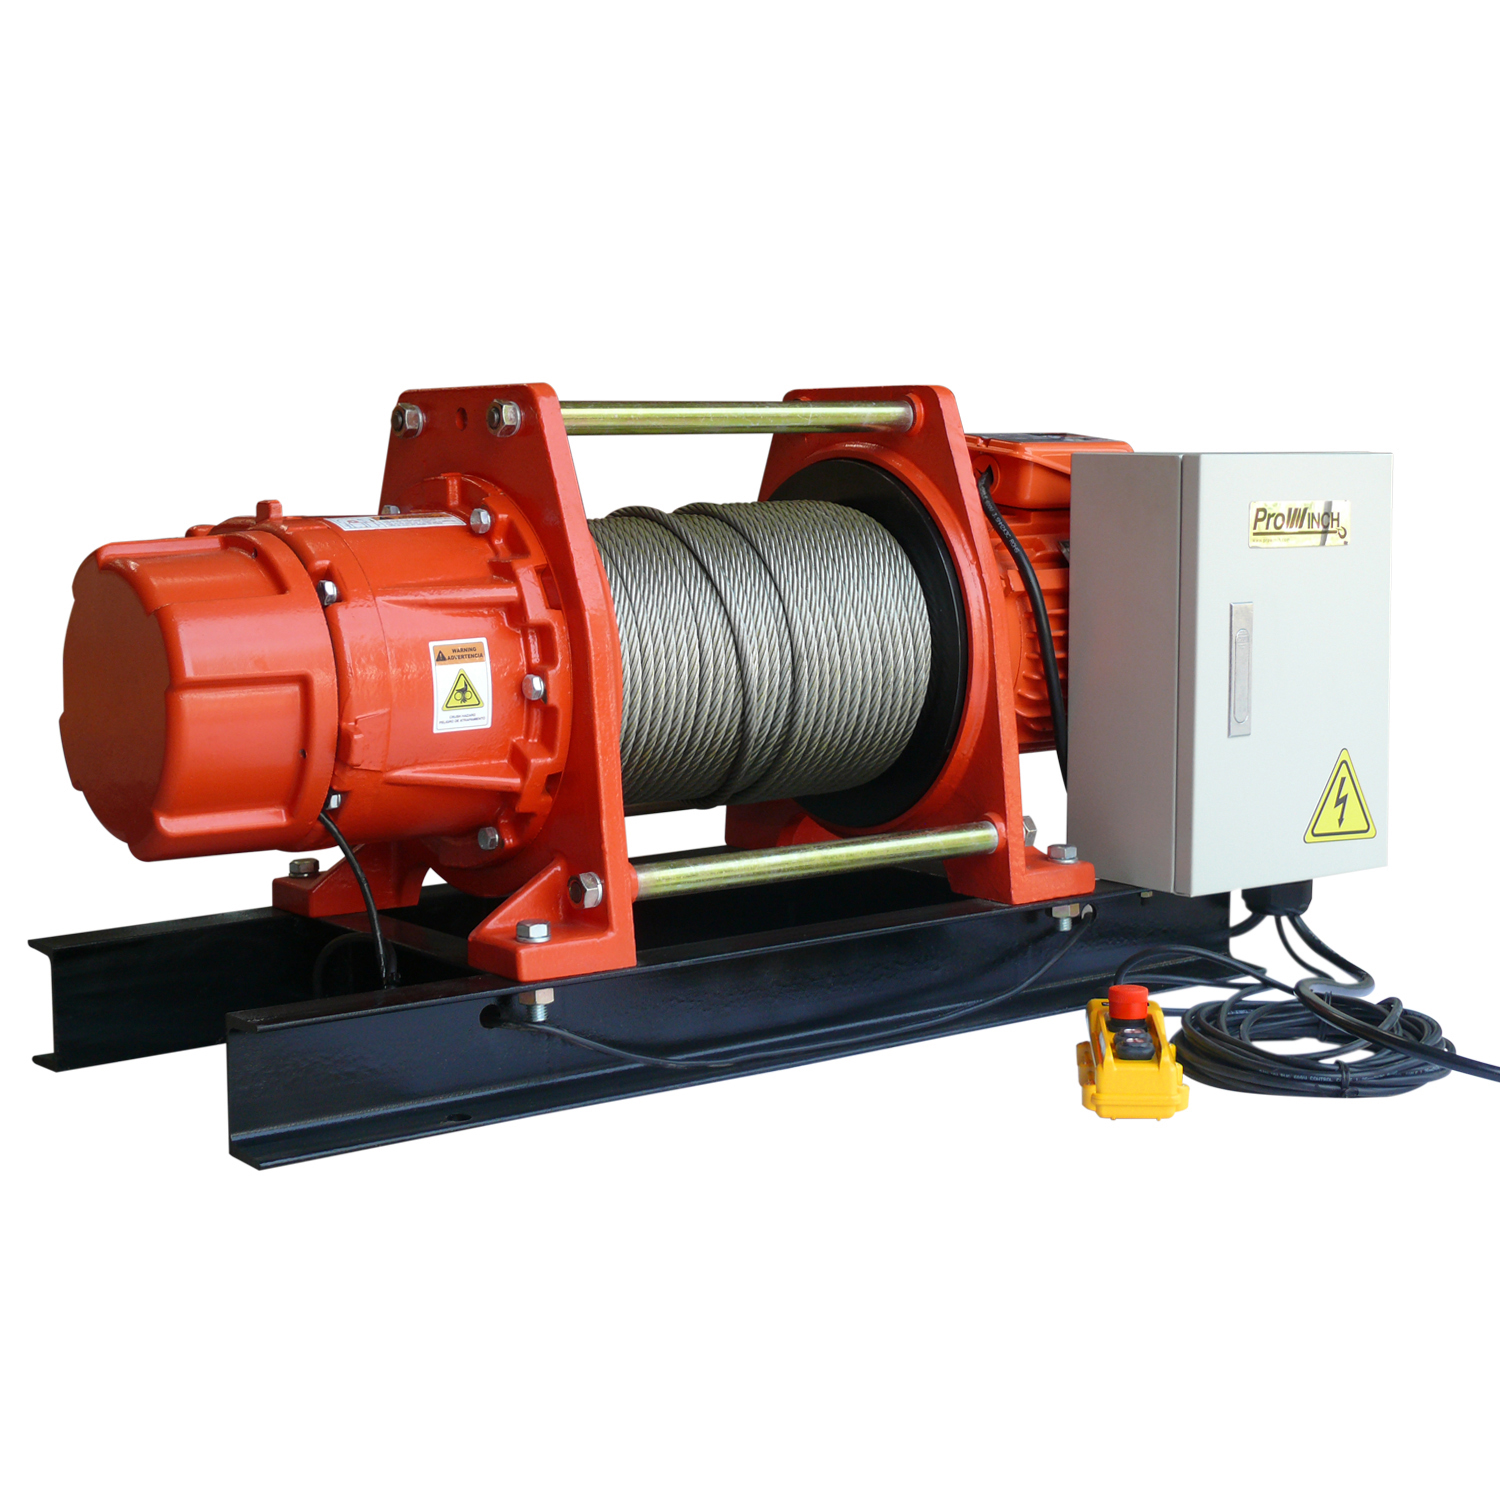 Prowinch 3500 lb Industrial Electric Winch Heavy Duty with Wire Rope 220/240V (1.75 Ton)